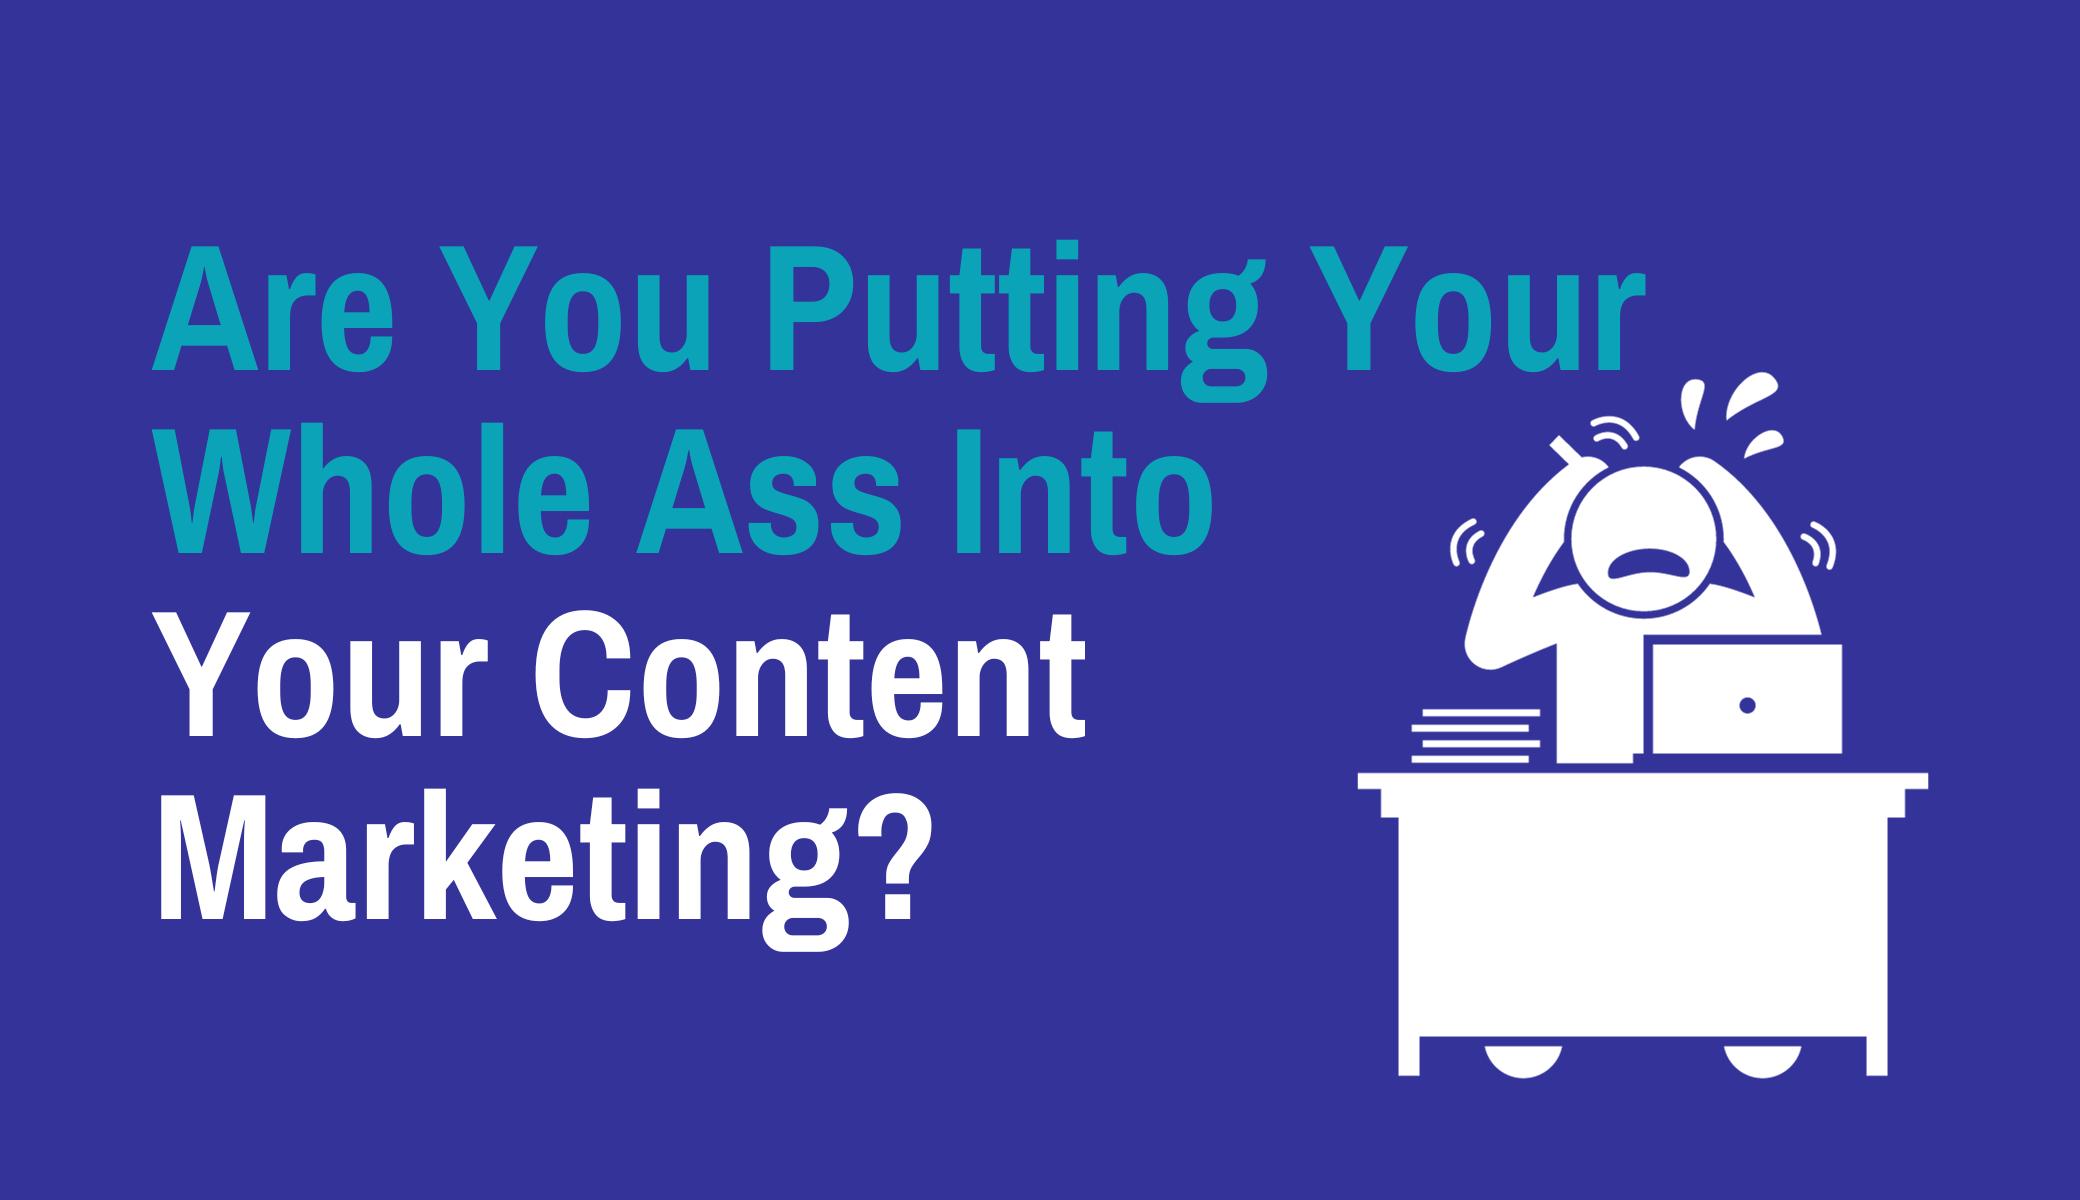 Are You Putting Your Whole Ass Into Your Content Marketing